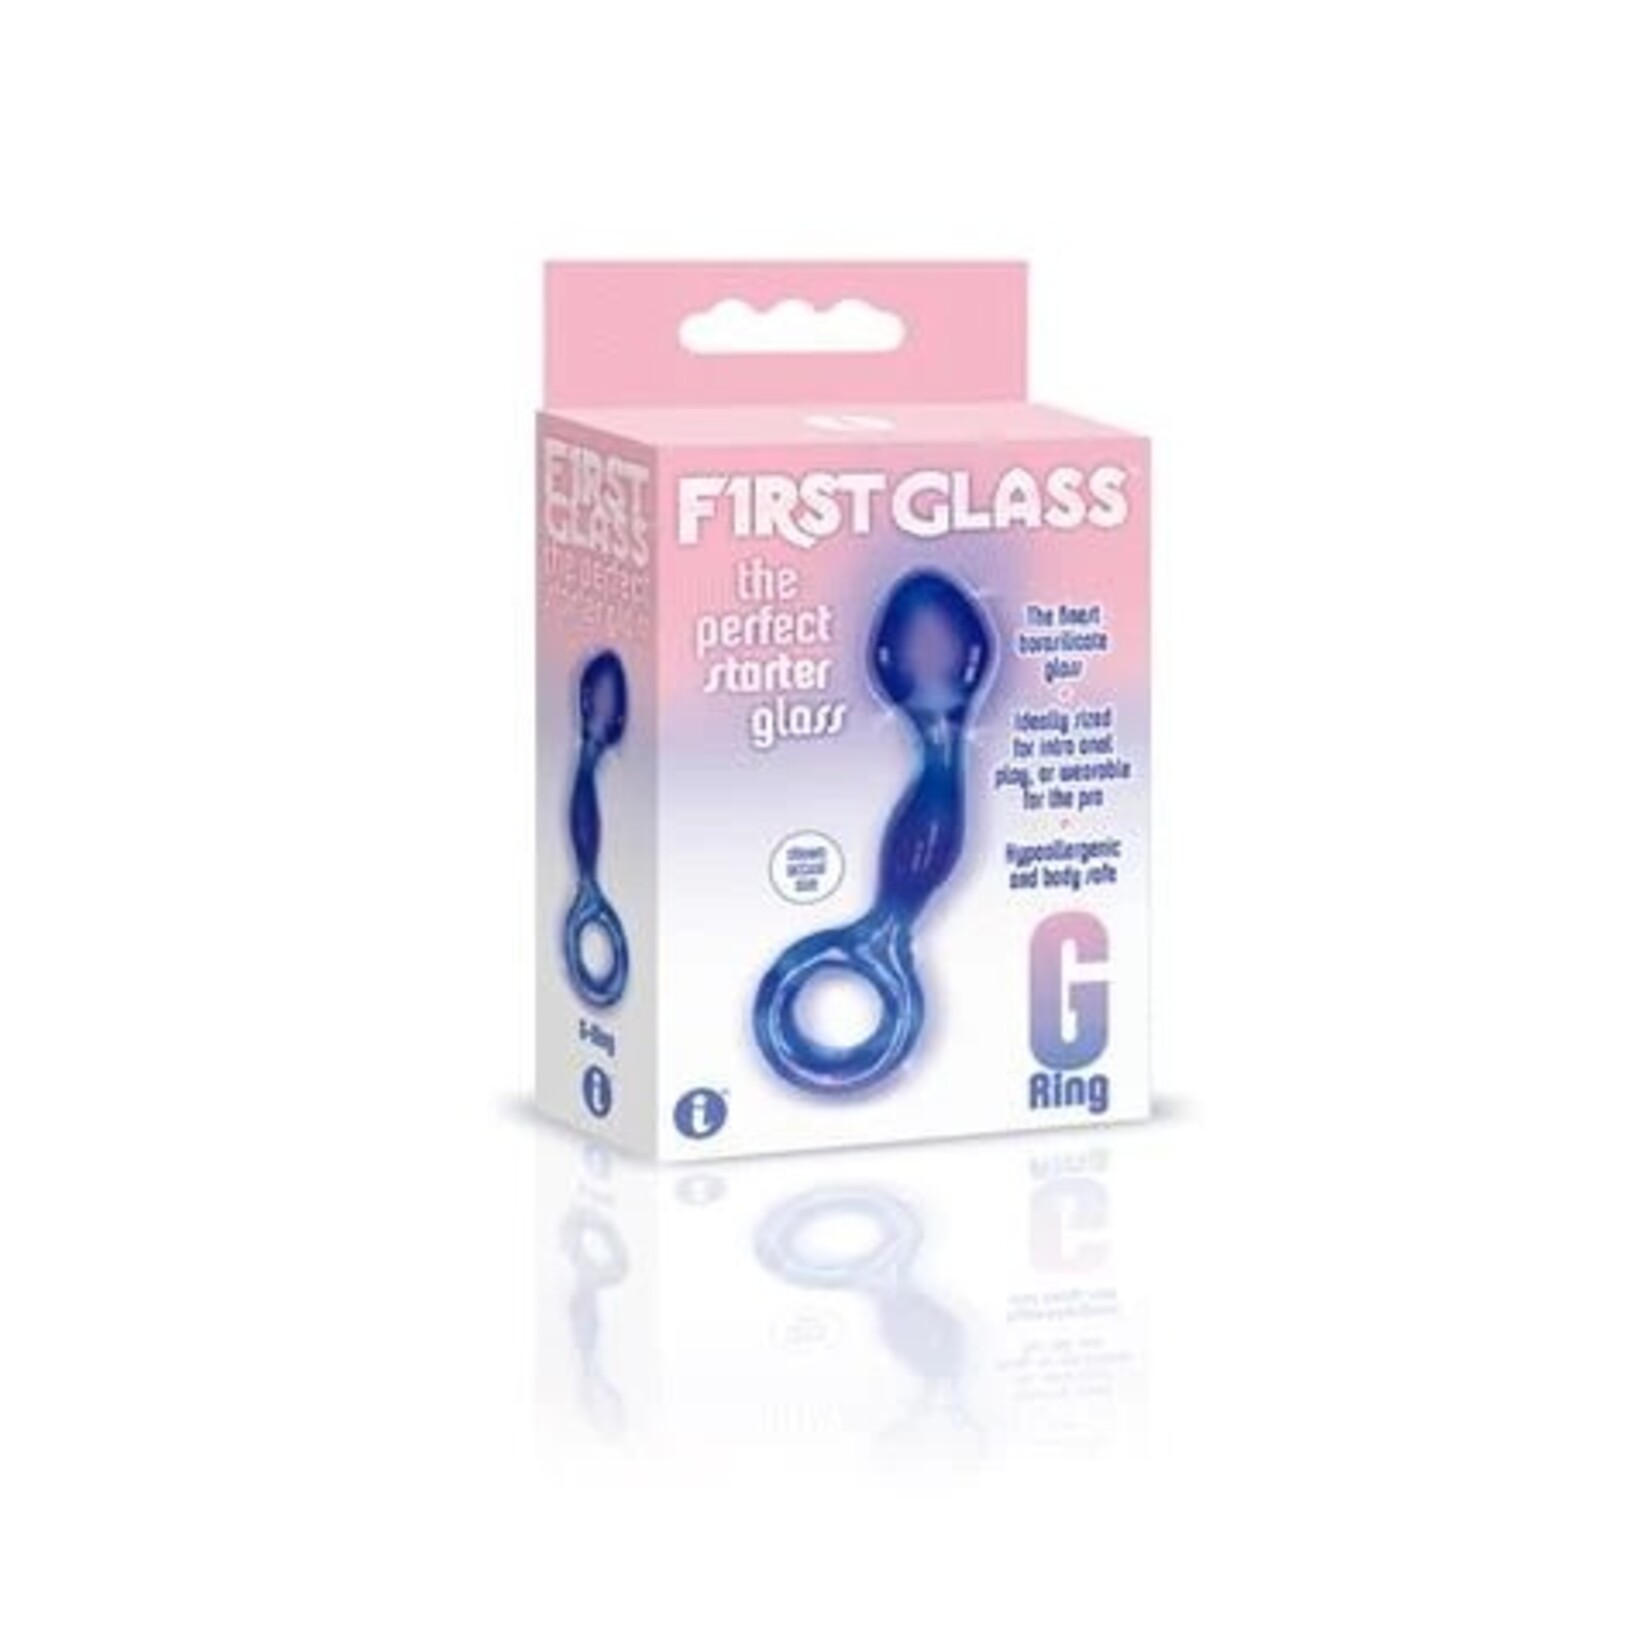 GLAS FIRST GLASS G-RING - ANAL AND PUSSY STIMULATOR